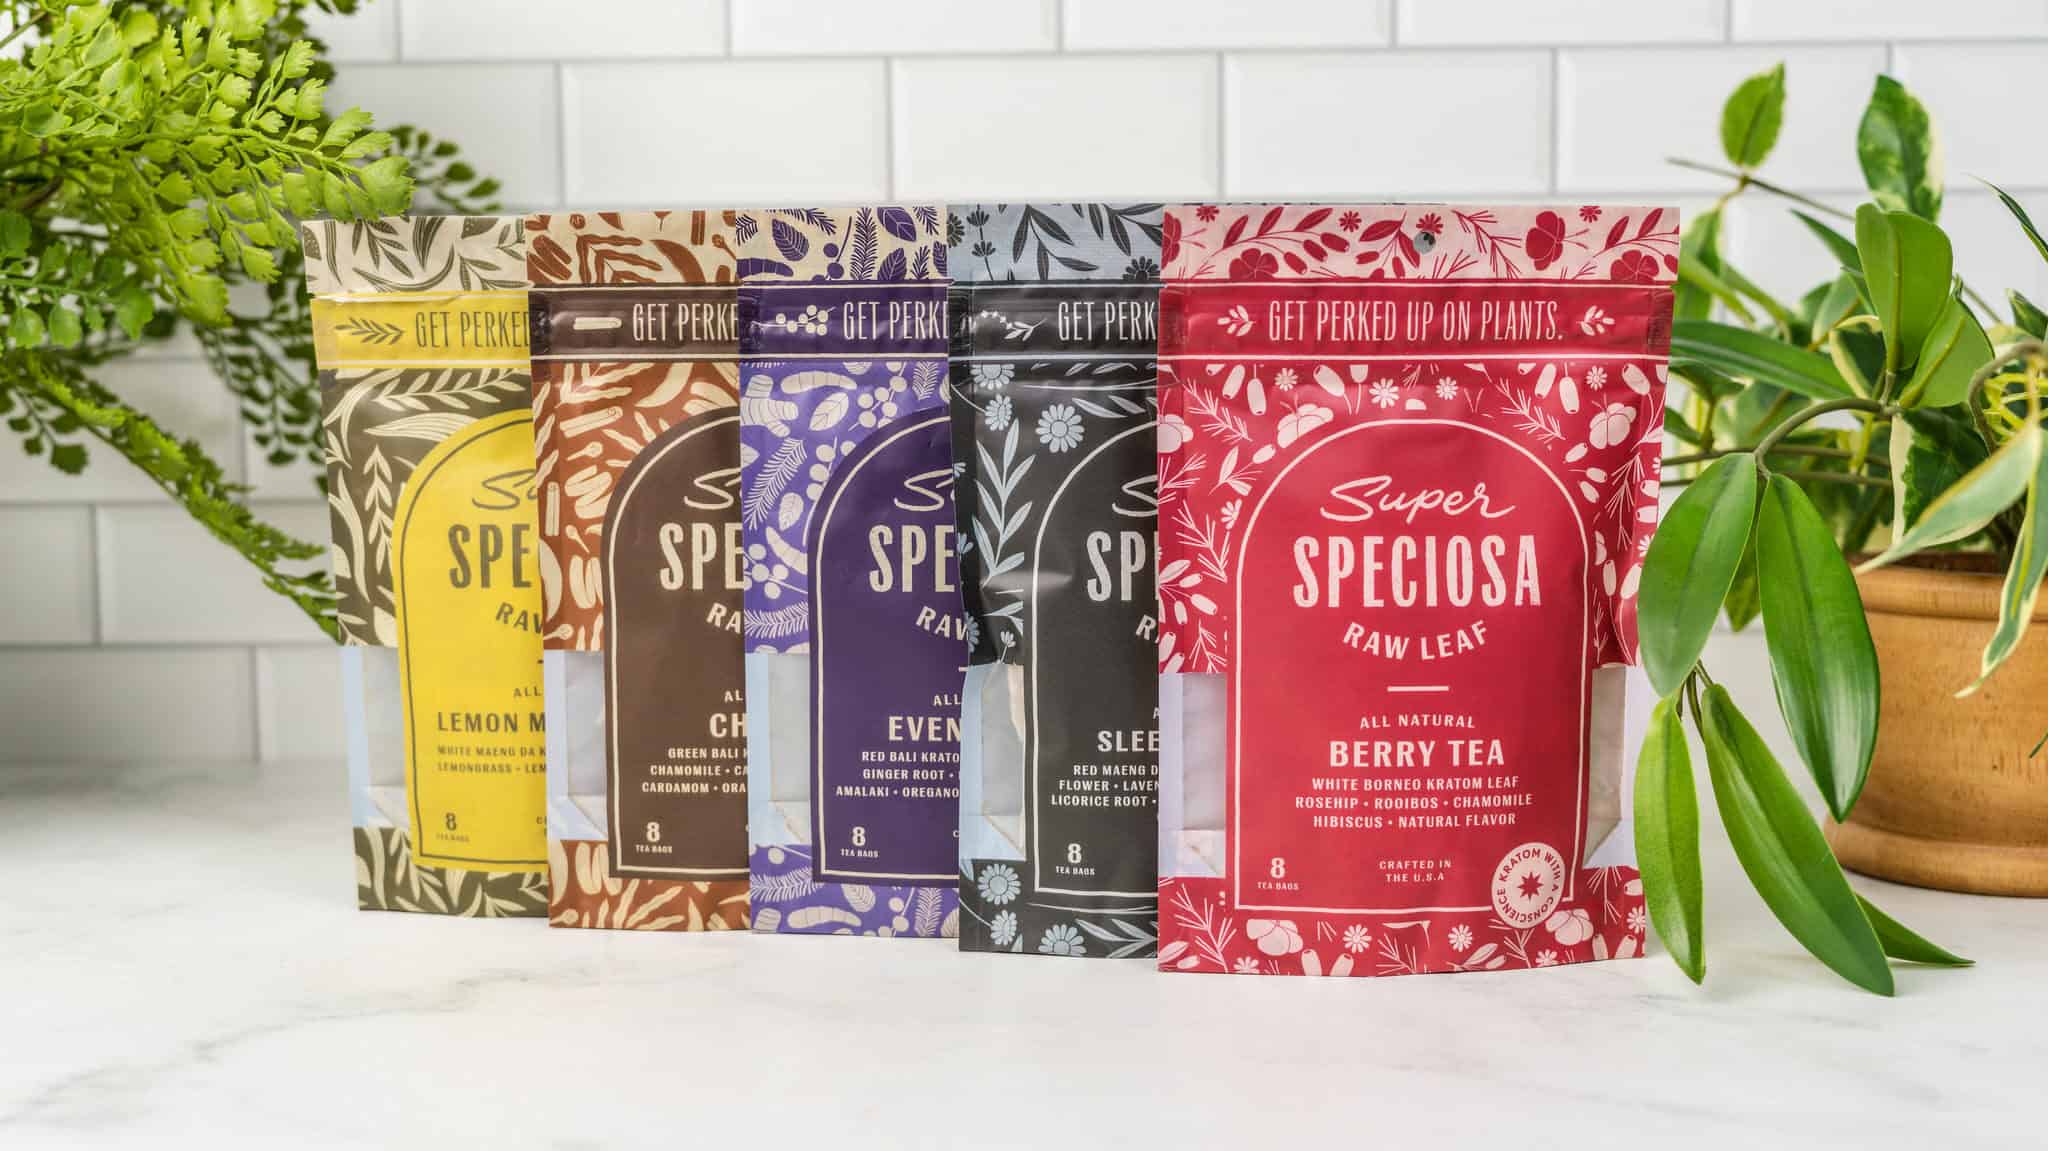 How to choose the right kratom tea! Super Speciosa offers multiple kinds of kratom tea bags to best fit your needs.